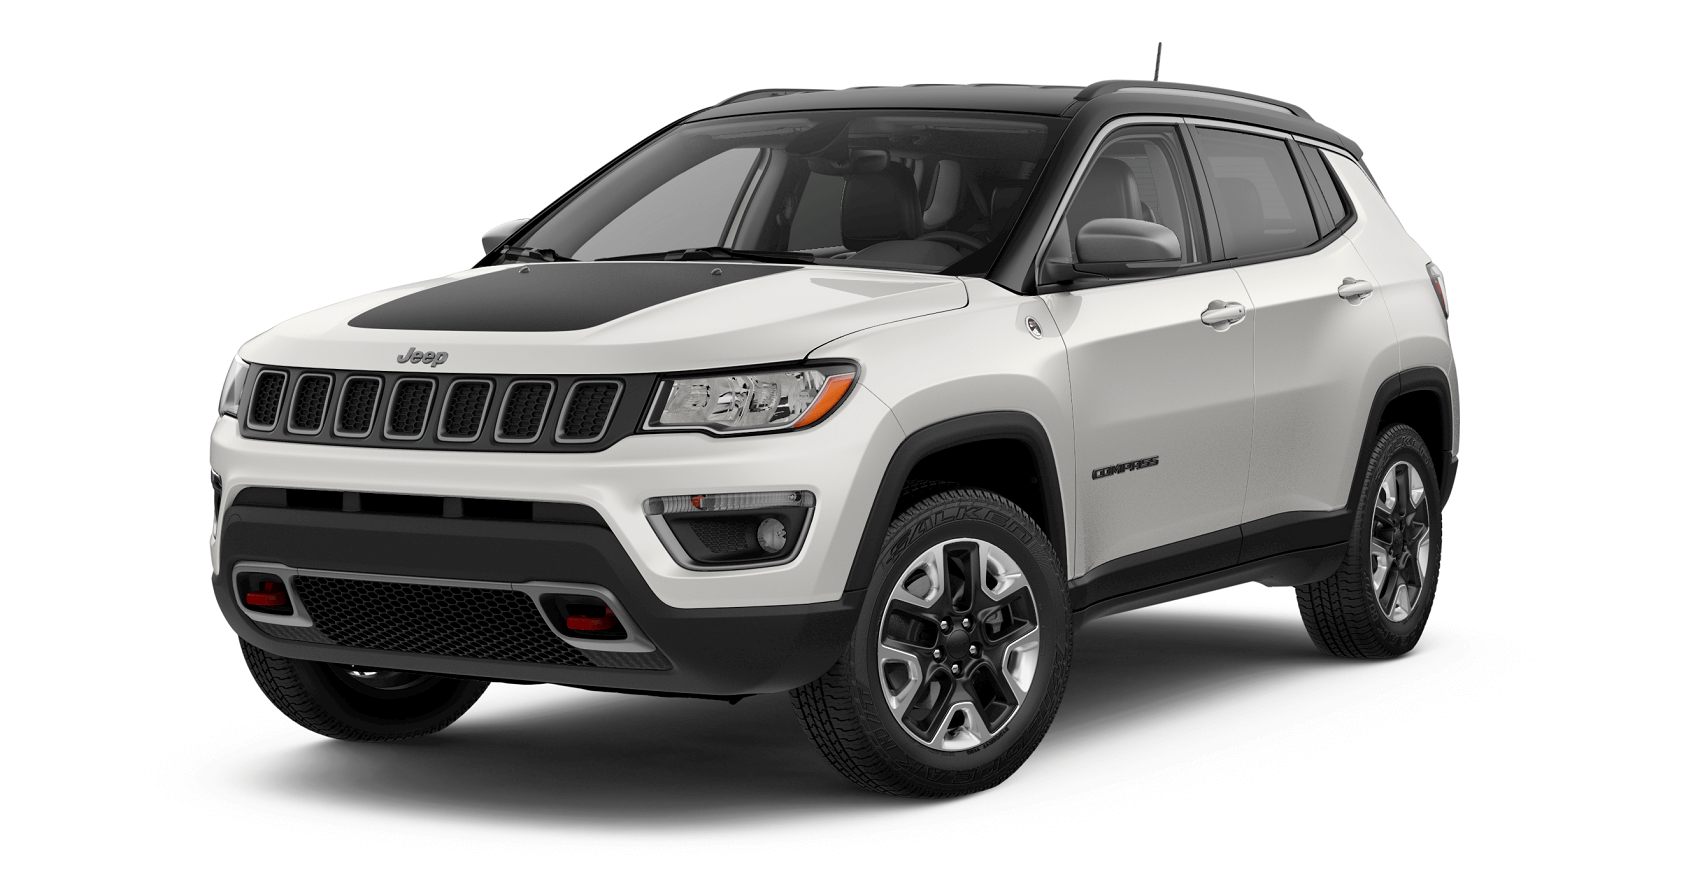 Jeep Compass Interior Review Elkins, WV 